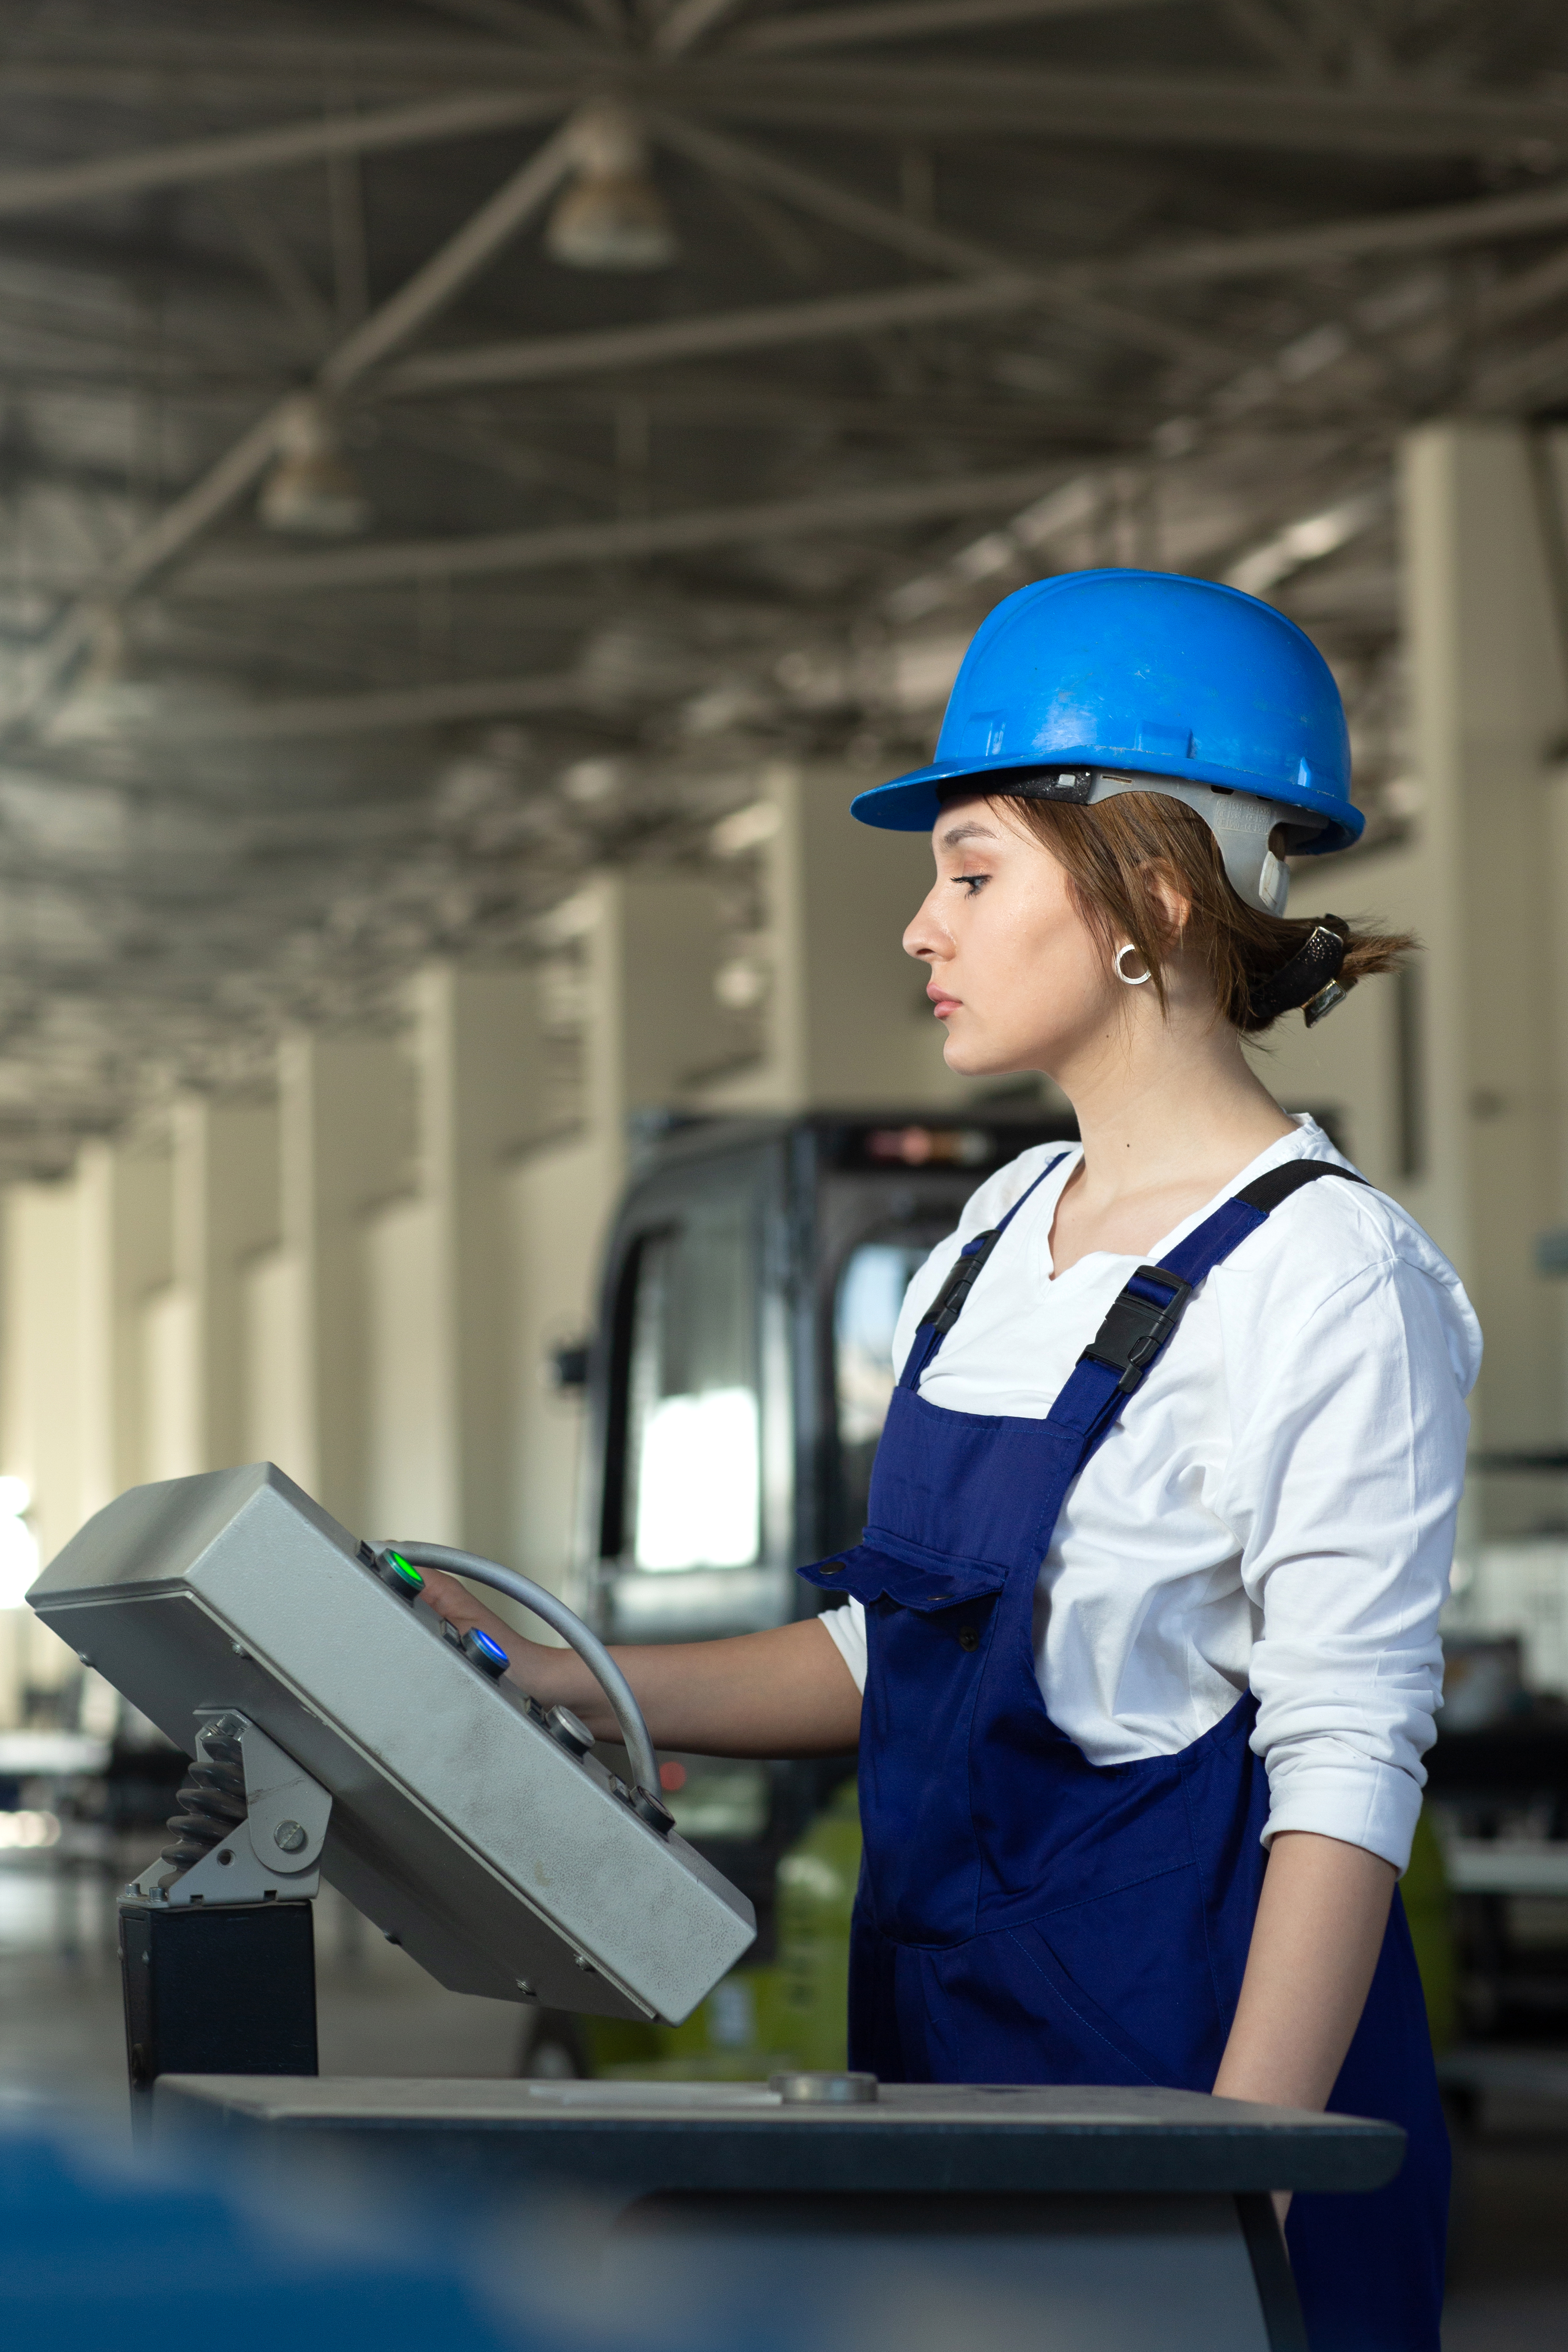 front-view-young-attractive-lady-blue-construction-suit-helmet-controlling-machines-hangar-working-during-daytime-buildings-architecture-construction